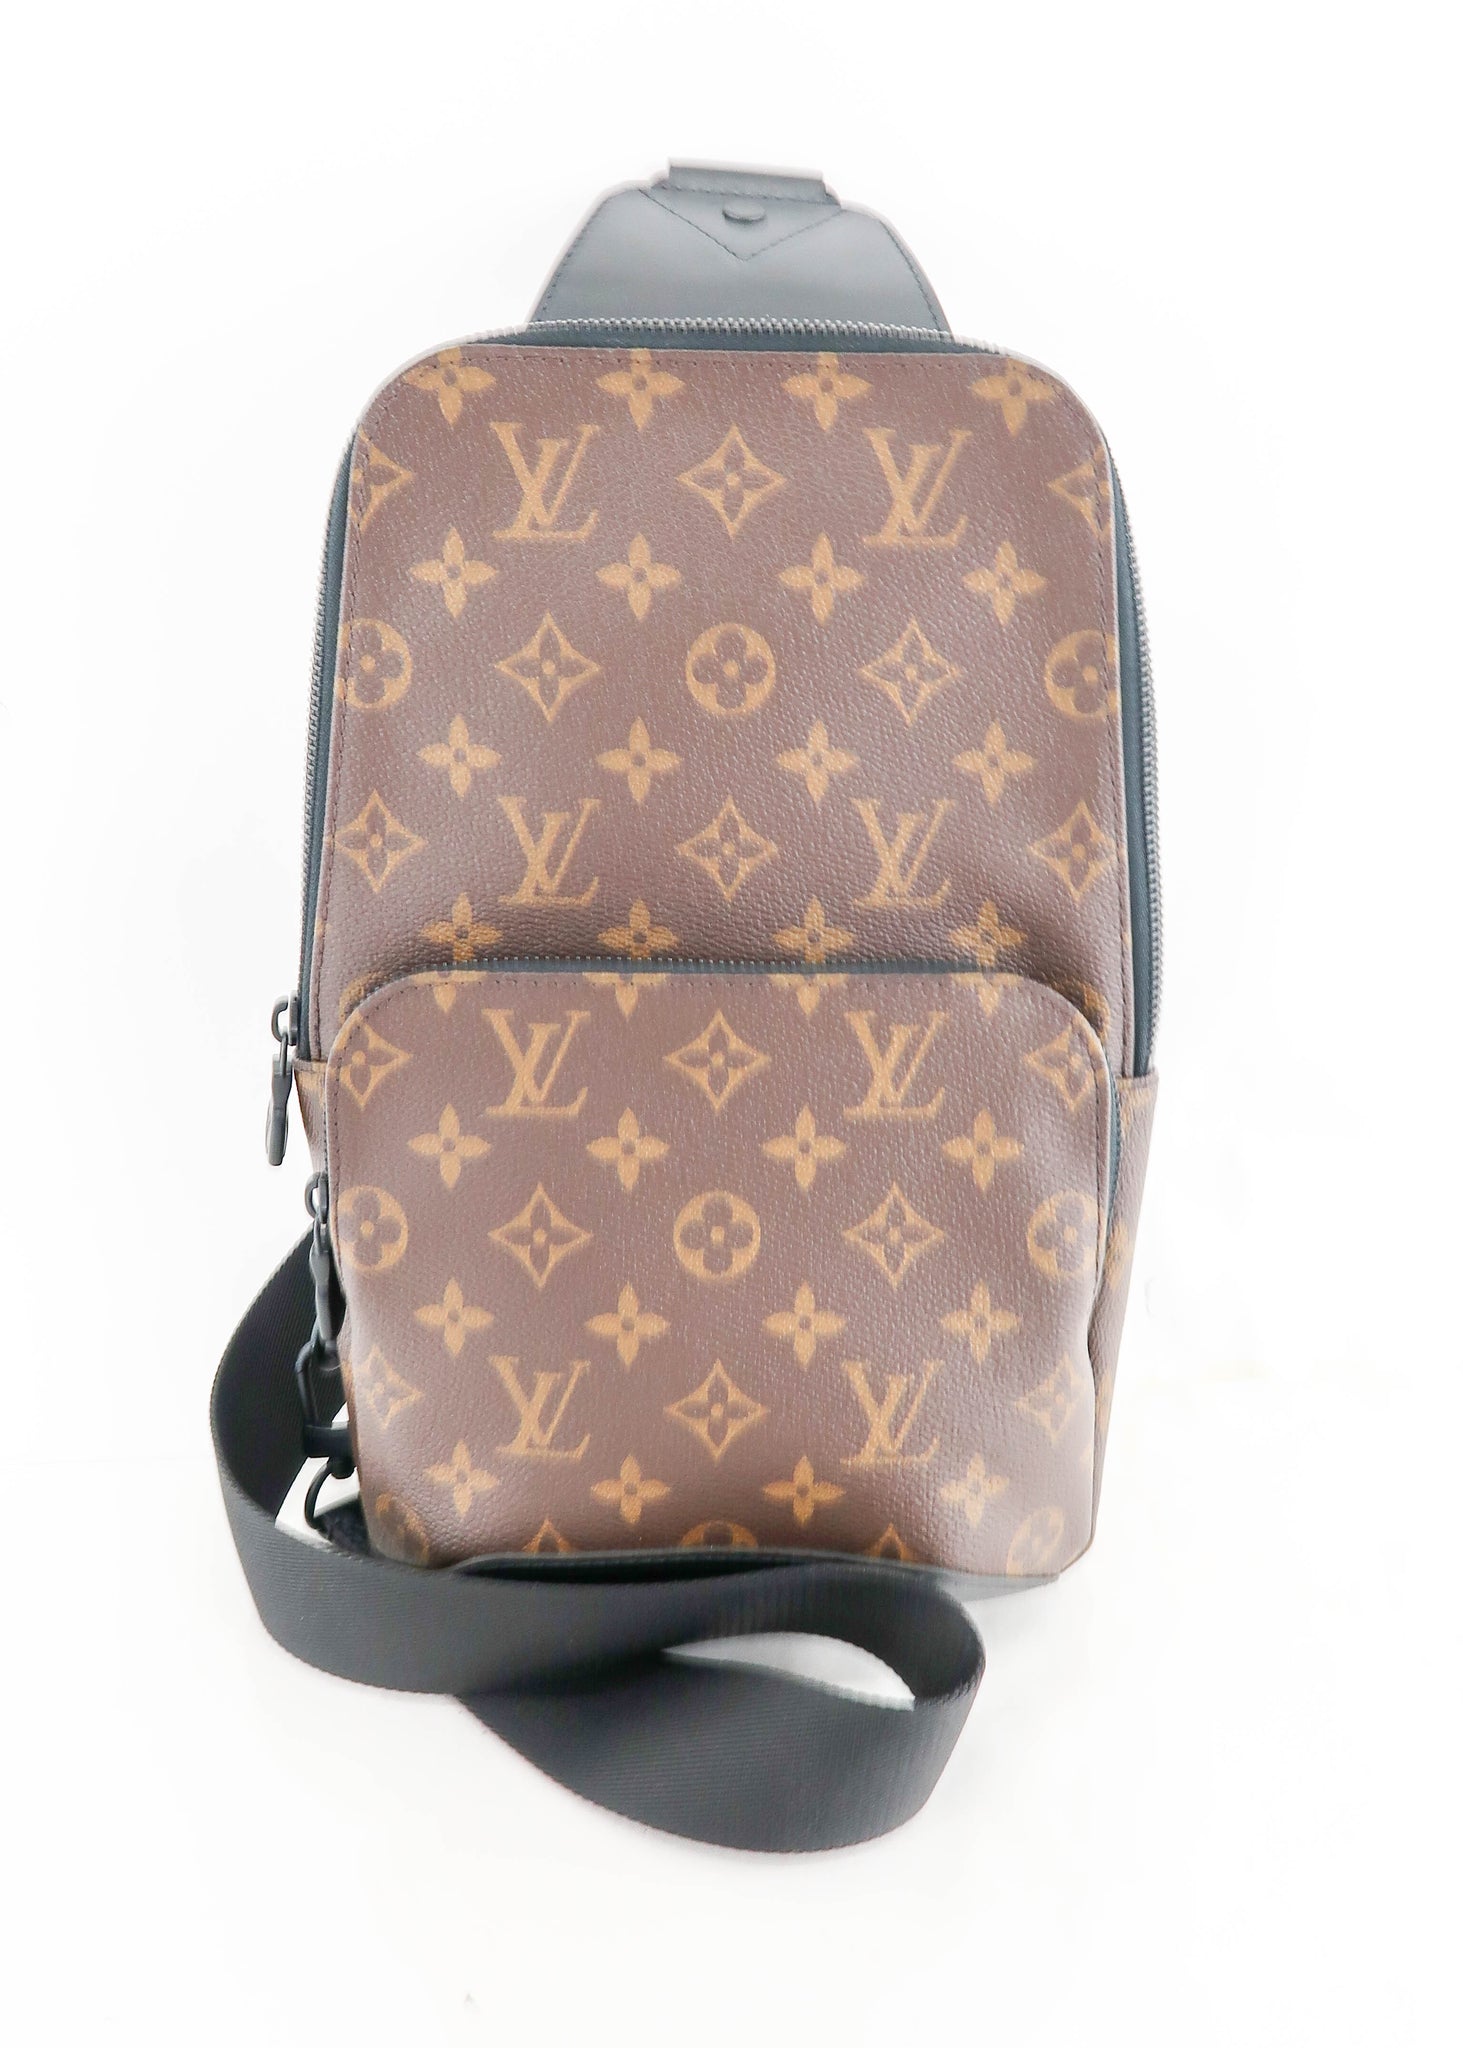 lv avenue sling bag outfit